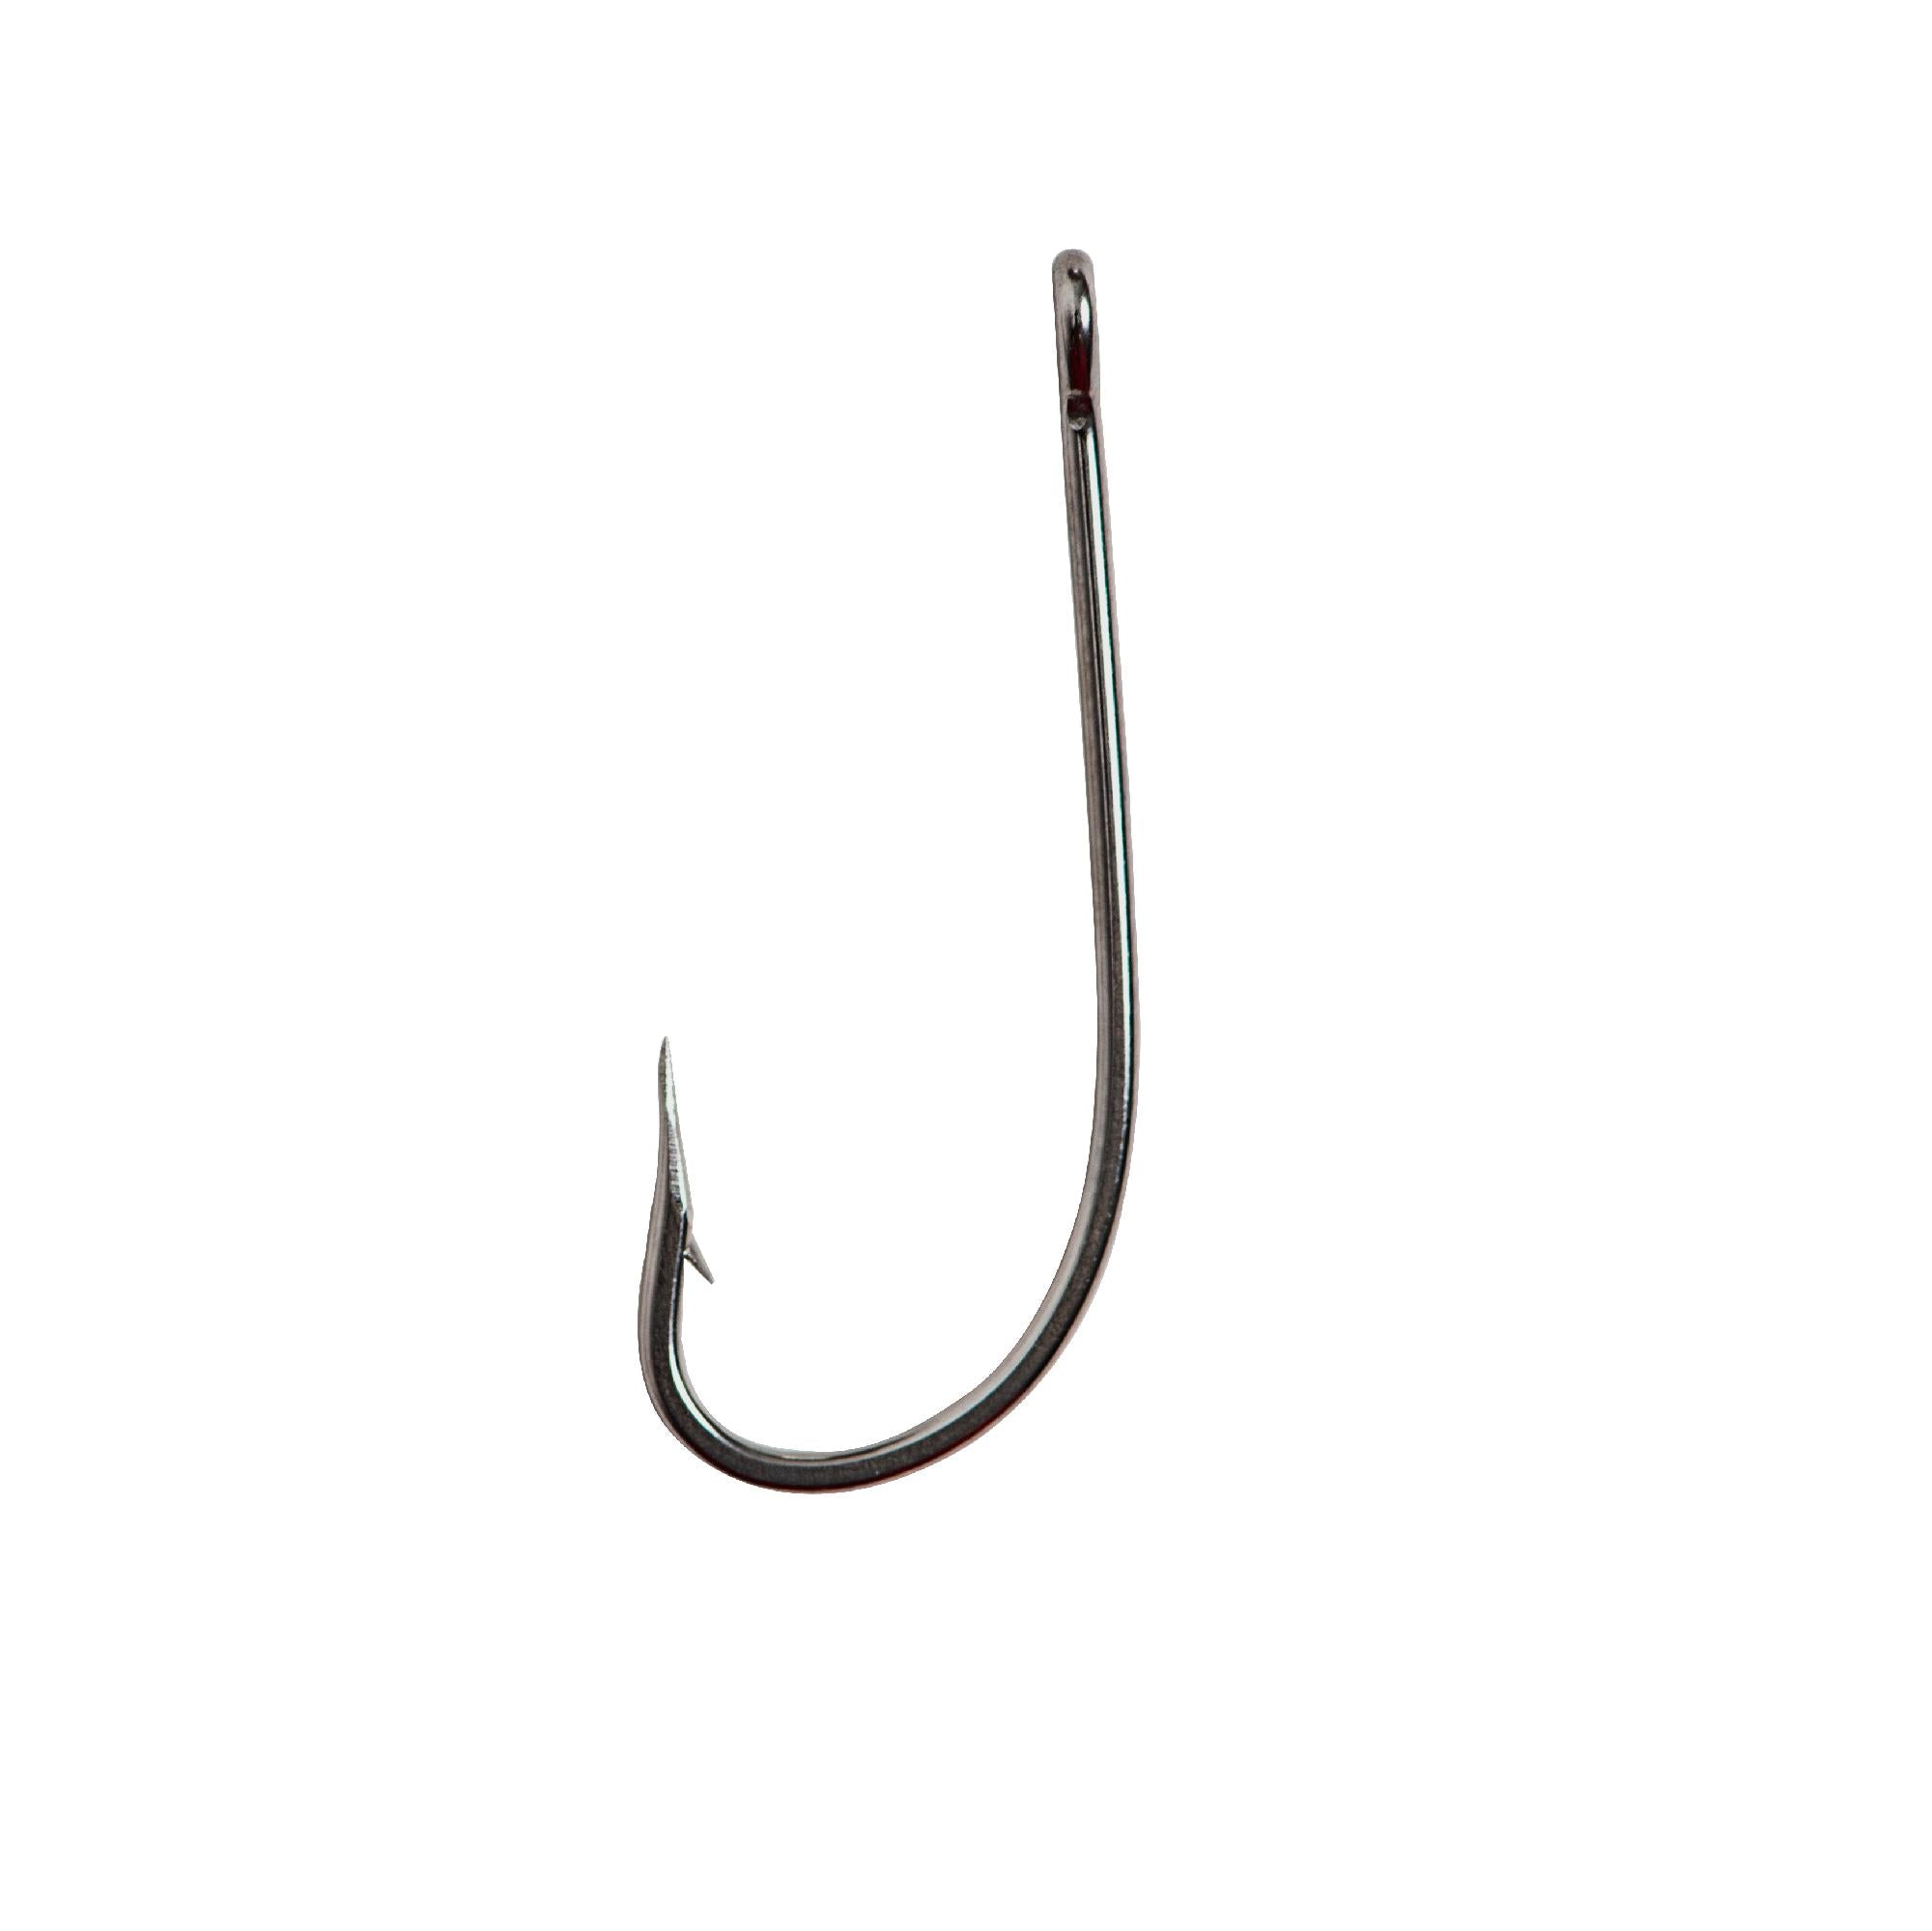 O'Shaughnessy Hook - Stainless Steel